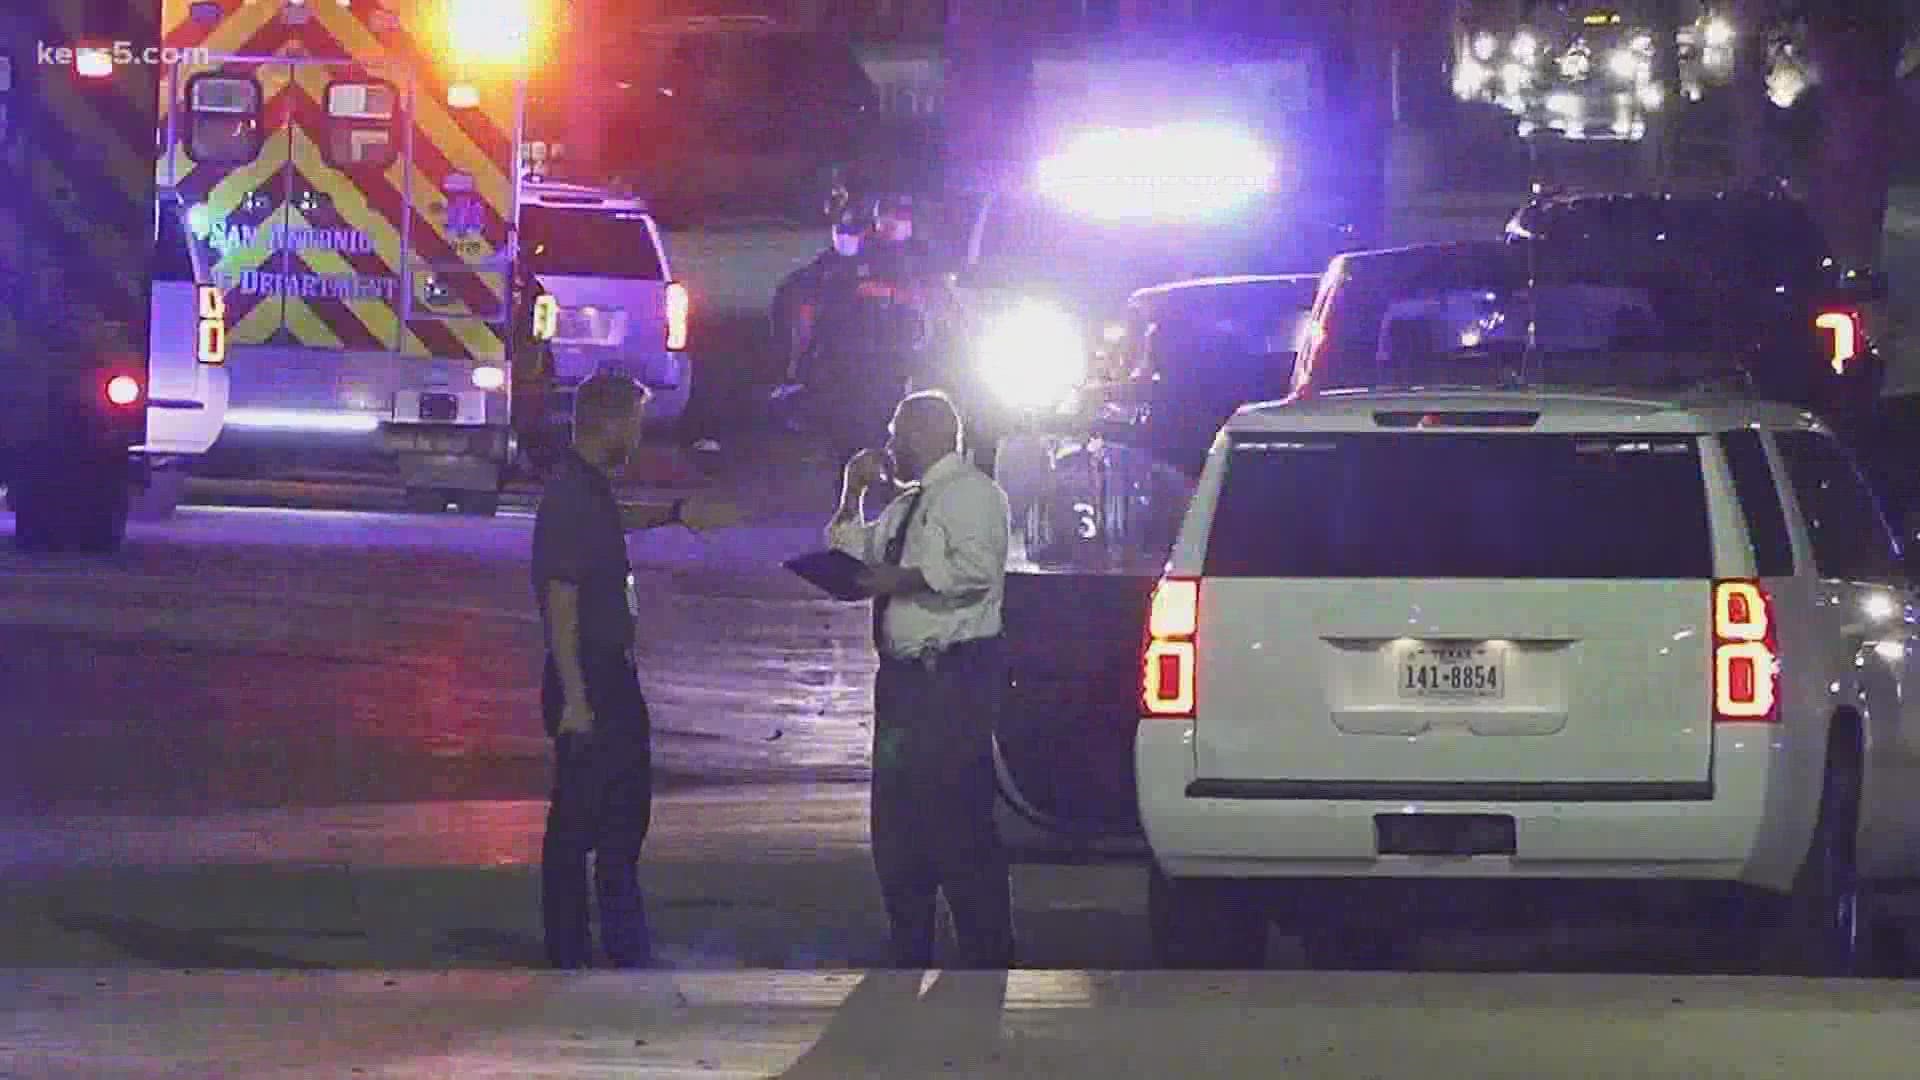 On Saturday, San Antonio Police officers and Bexar County Sheriff’s deputies responded to several calls that led to gunfire.